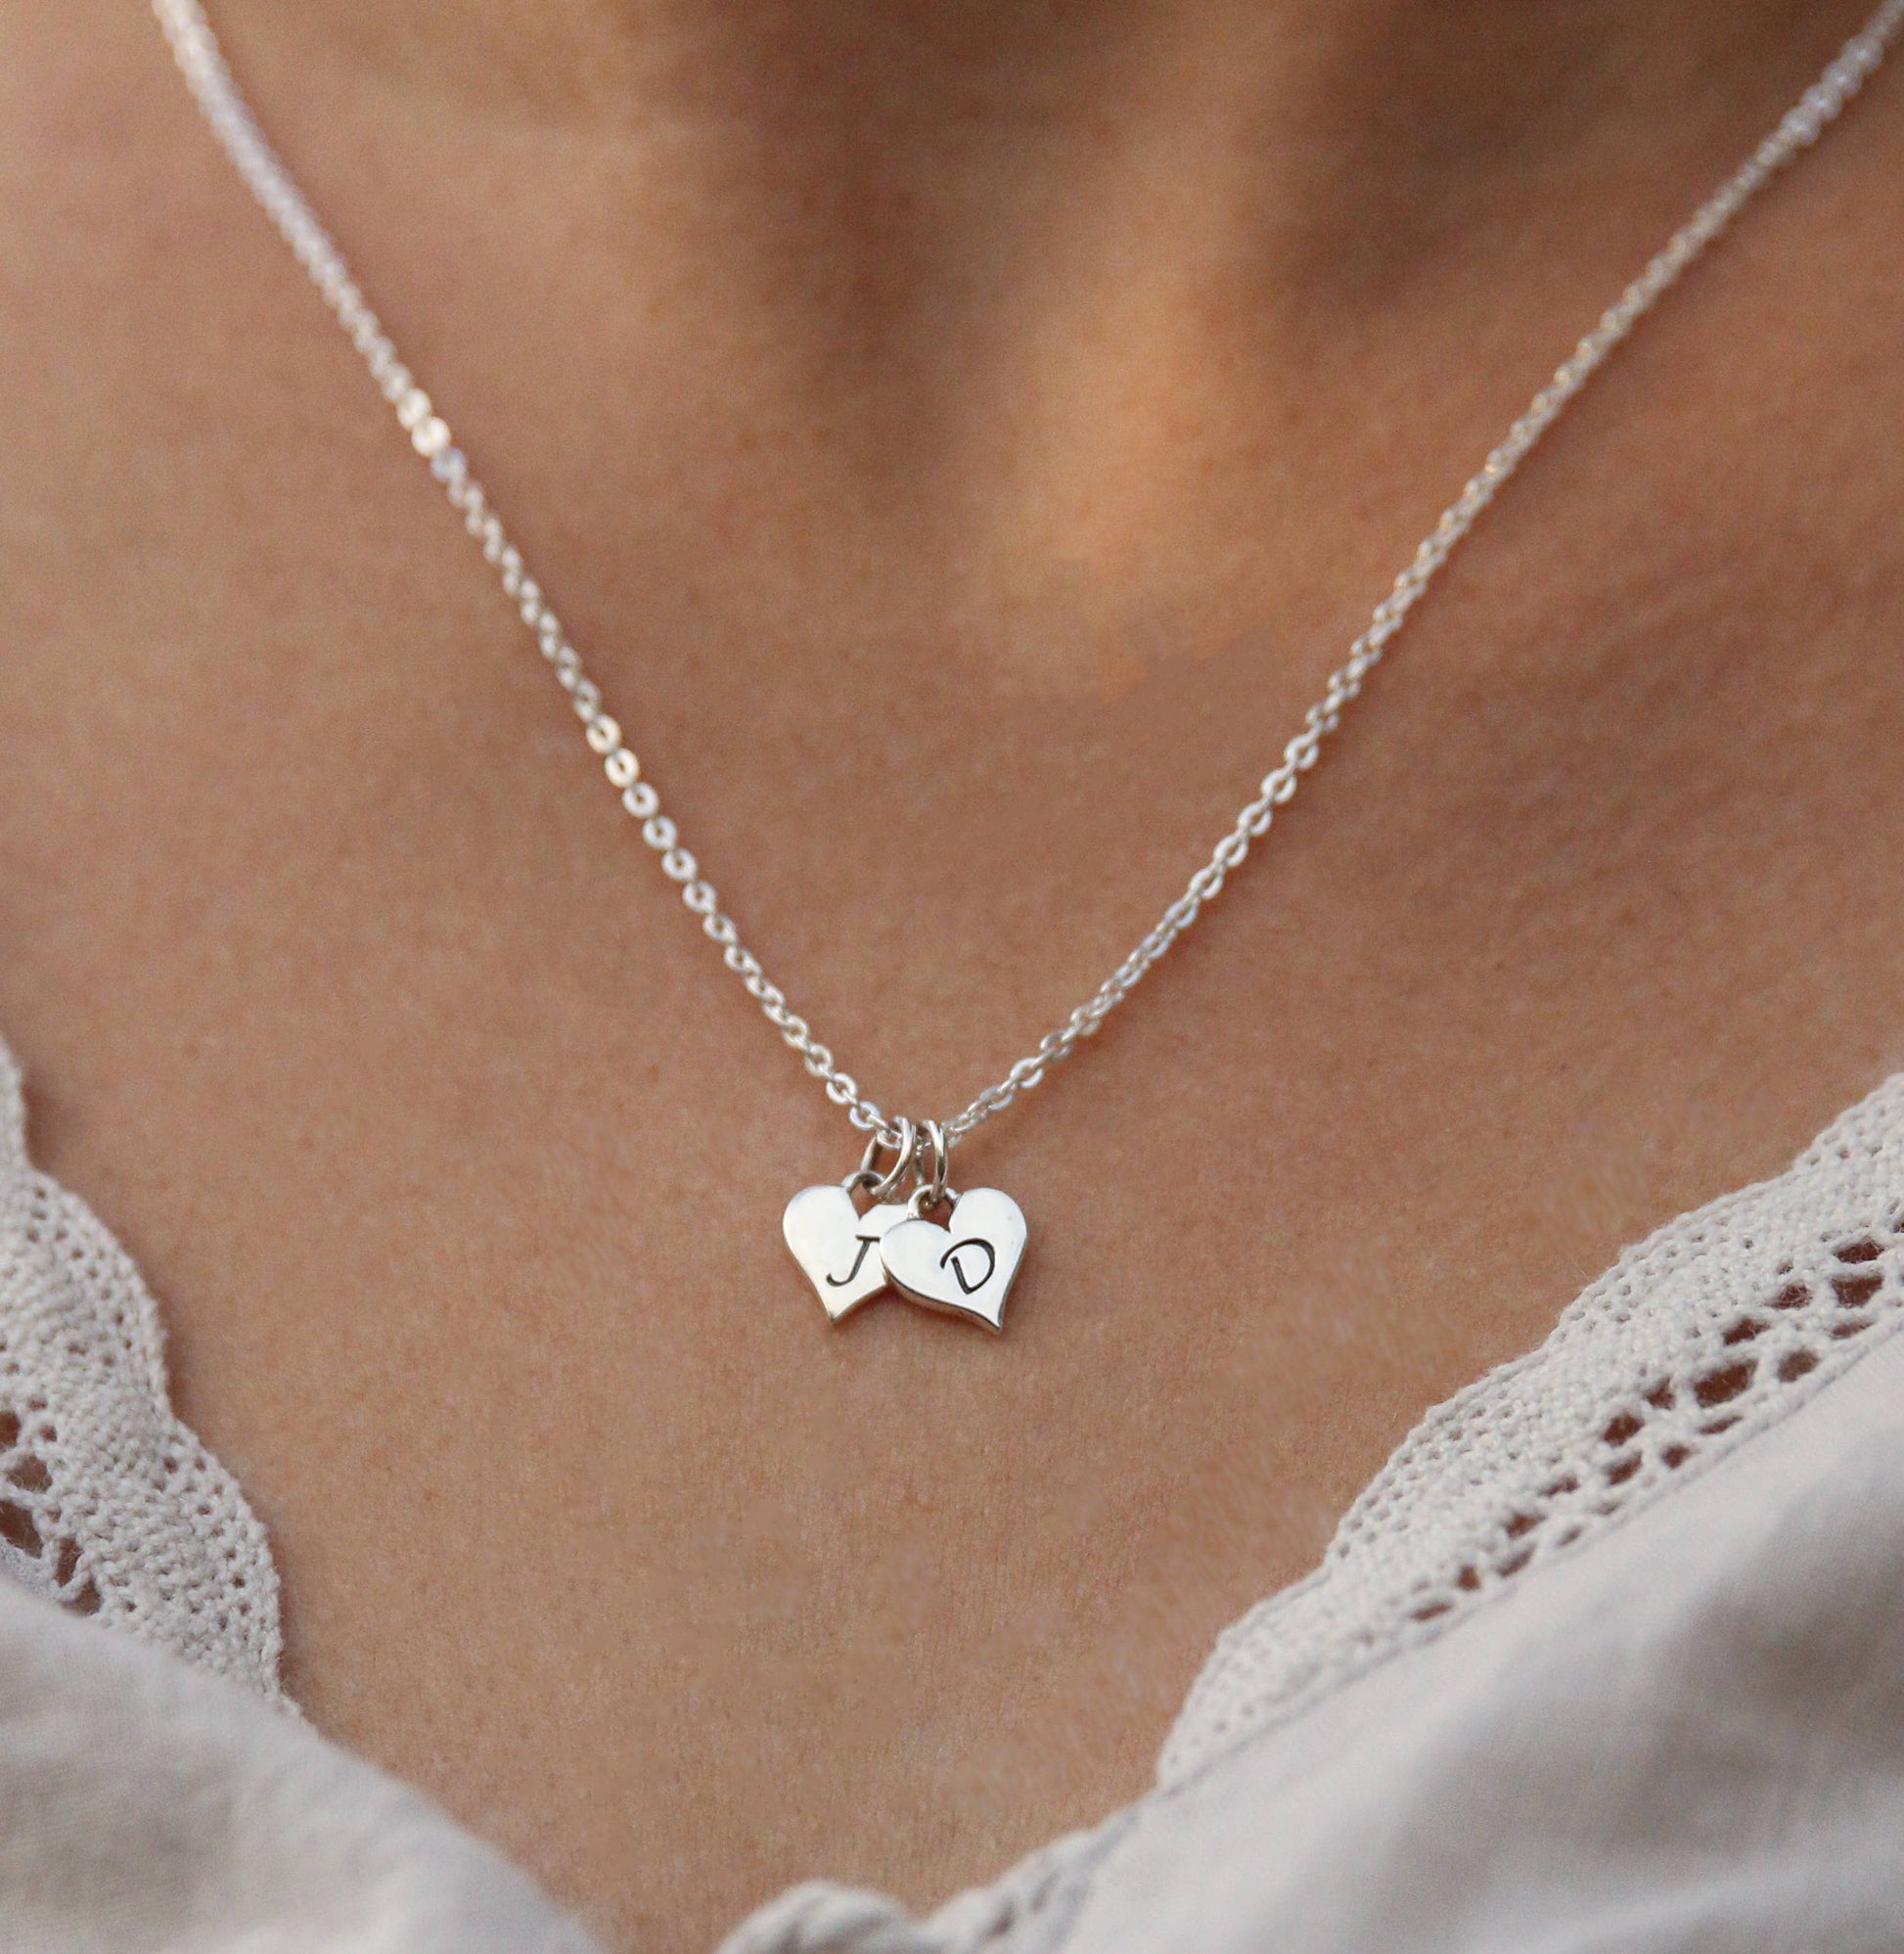 Heart Necklace in Sterling Silver with Initials